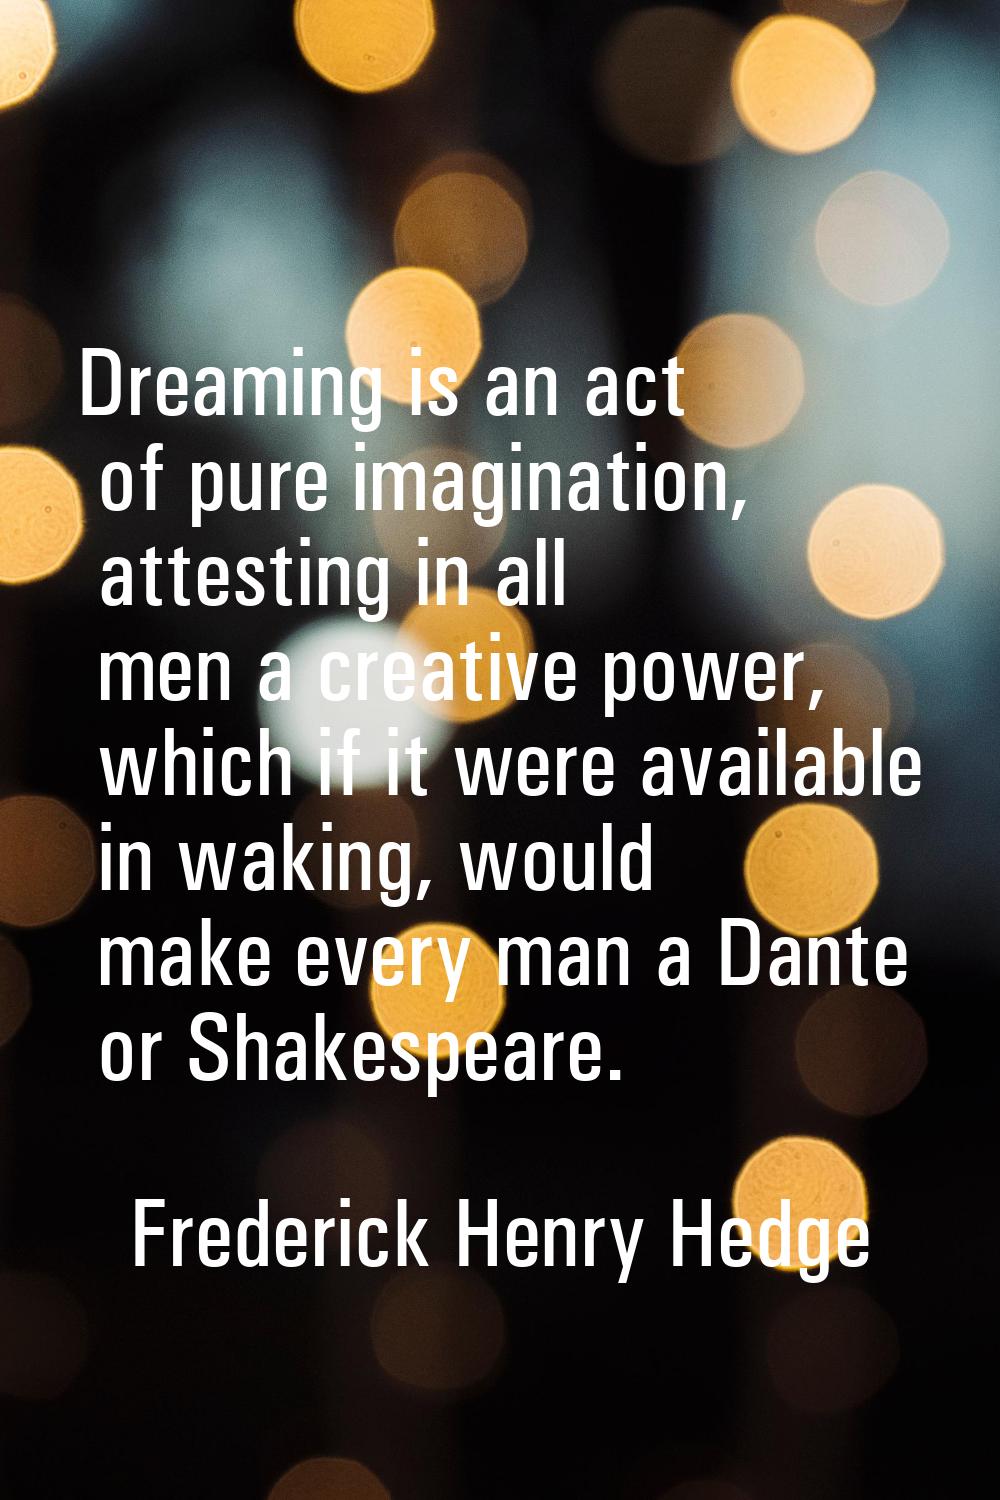 Dreaming is an act of pure imagination, attesting in all men a creative power, which if it were ava